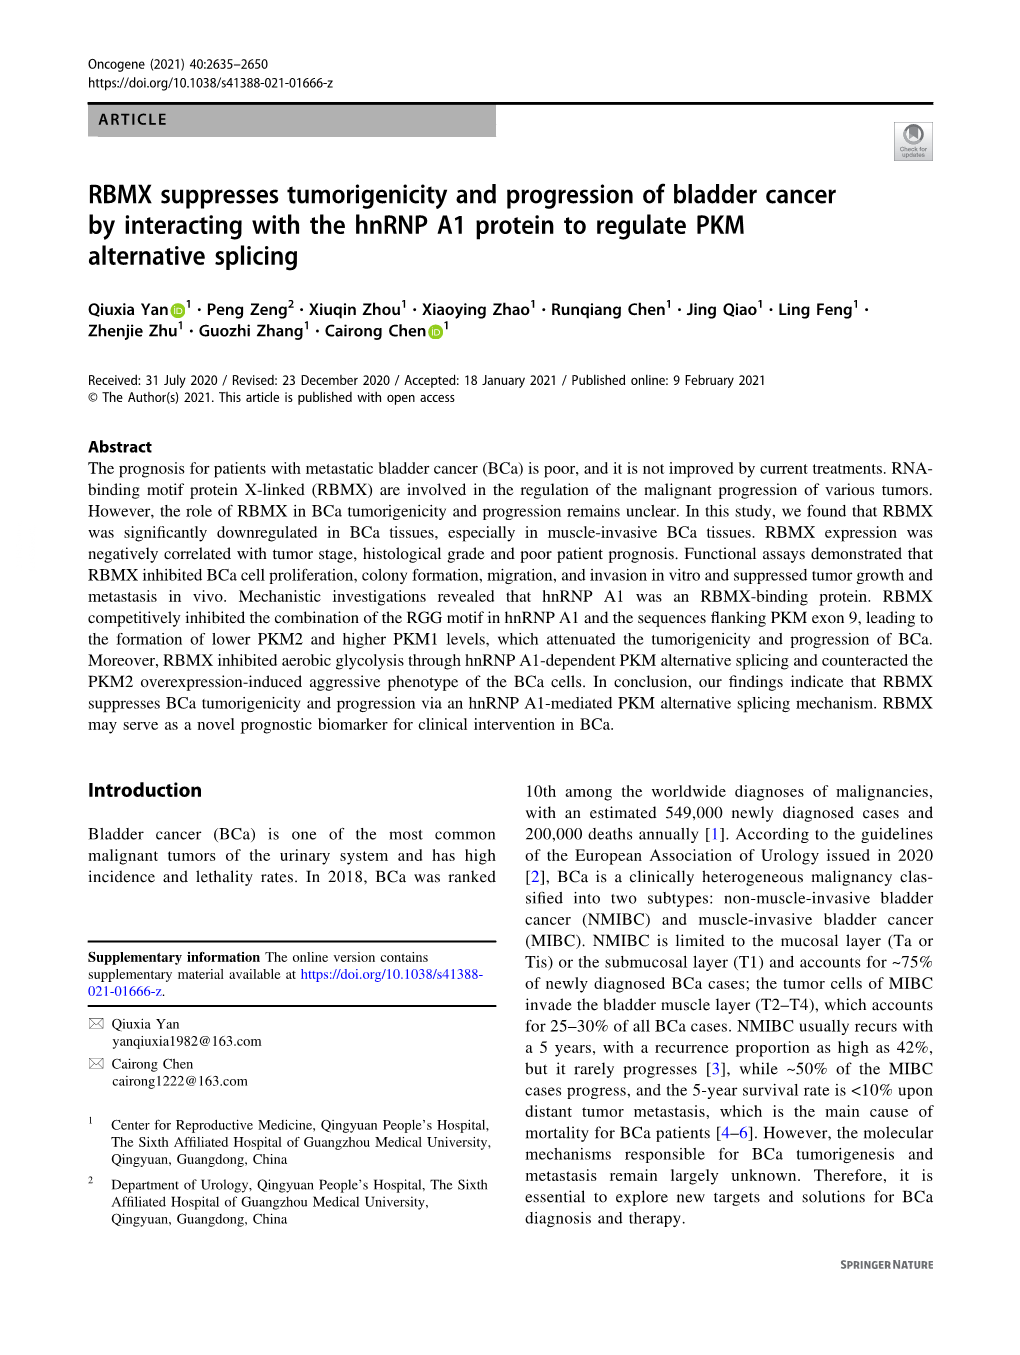 RBMX Suppresses Tumorigenicity and Progression of Bladder Cancer by Interacting with the Hnrnp A1 Protein to Regulate PKM Alternative Splicing